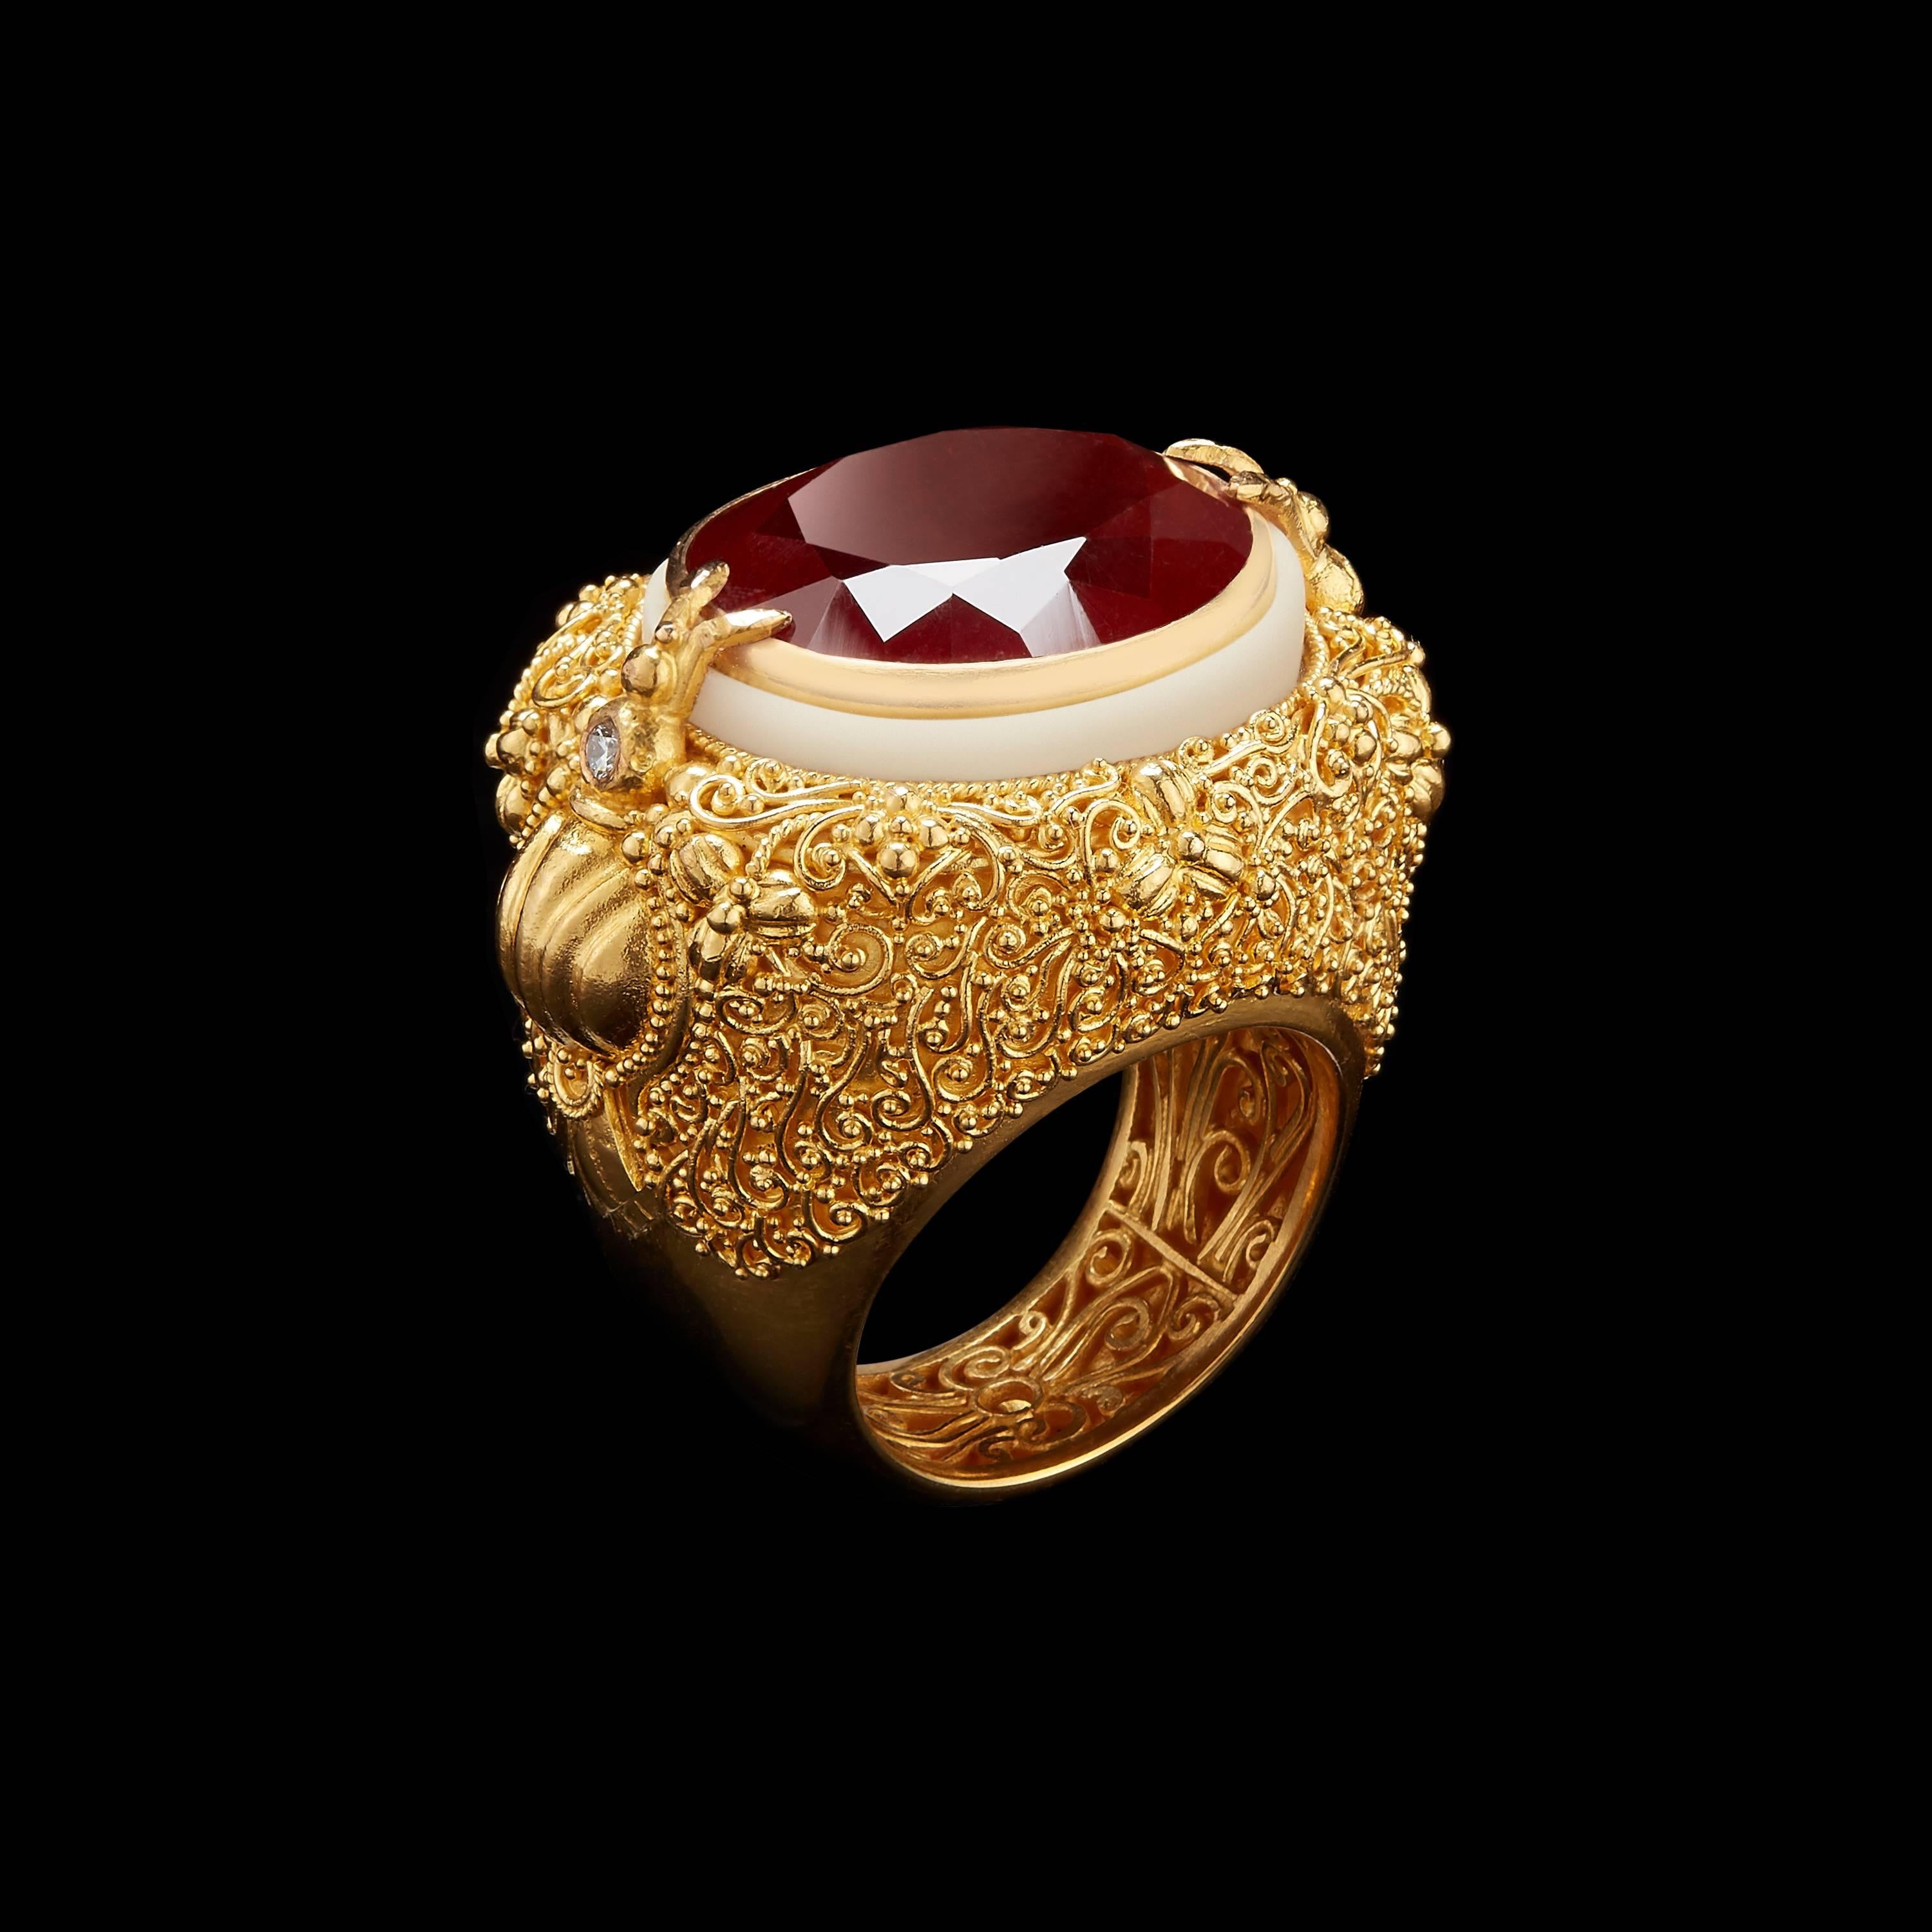 *Please contact us for more information on this piece or on creating your own Alexandra Mor custom Design. 

This ring features an Oval-cut rich orange Spessartite Garnet weighing 24.40 Cts set in a 22 karat gold bezel accented with a carved,